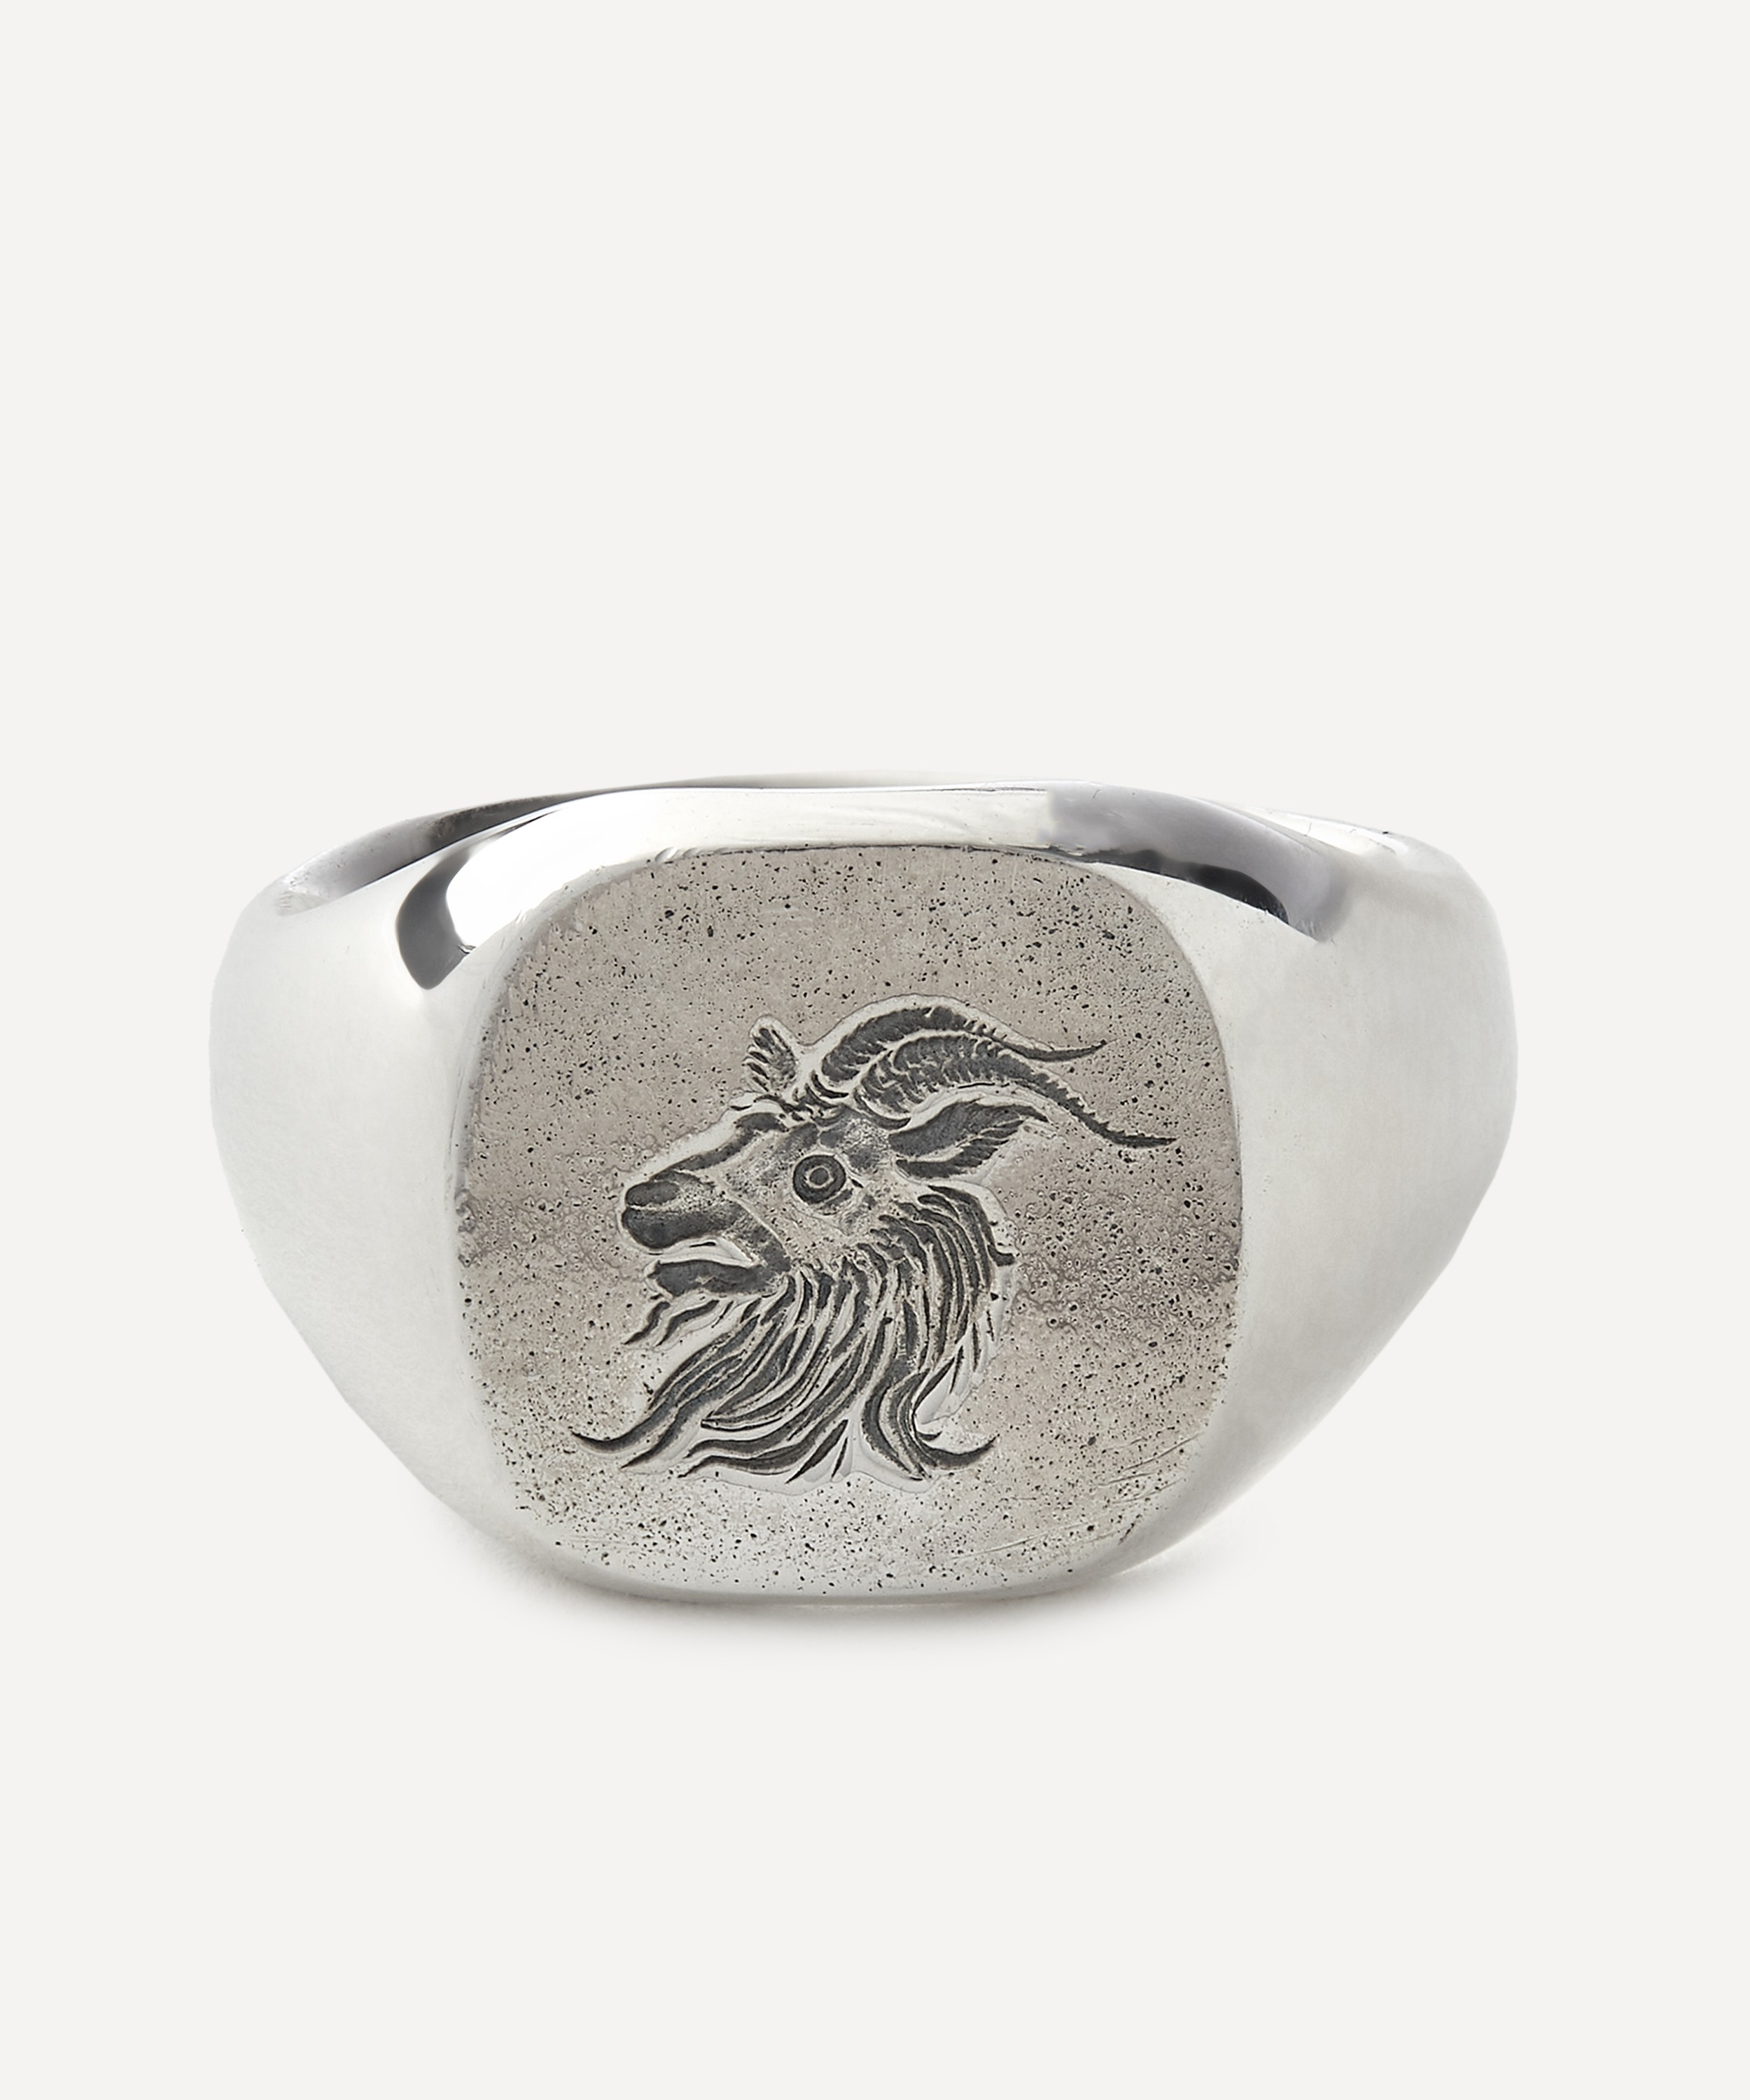 Frederick Grove - Sterling Silver Goat Signet Ring